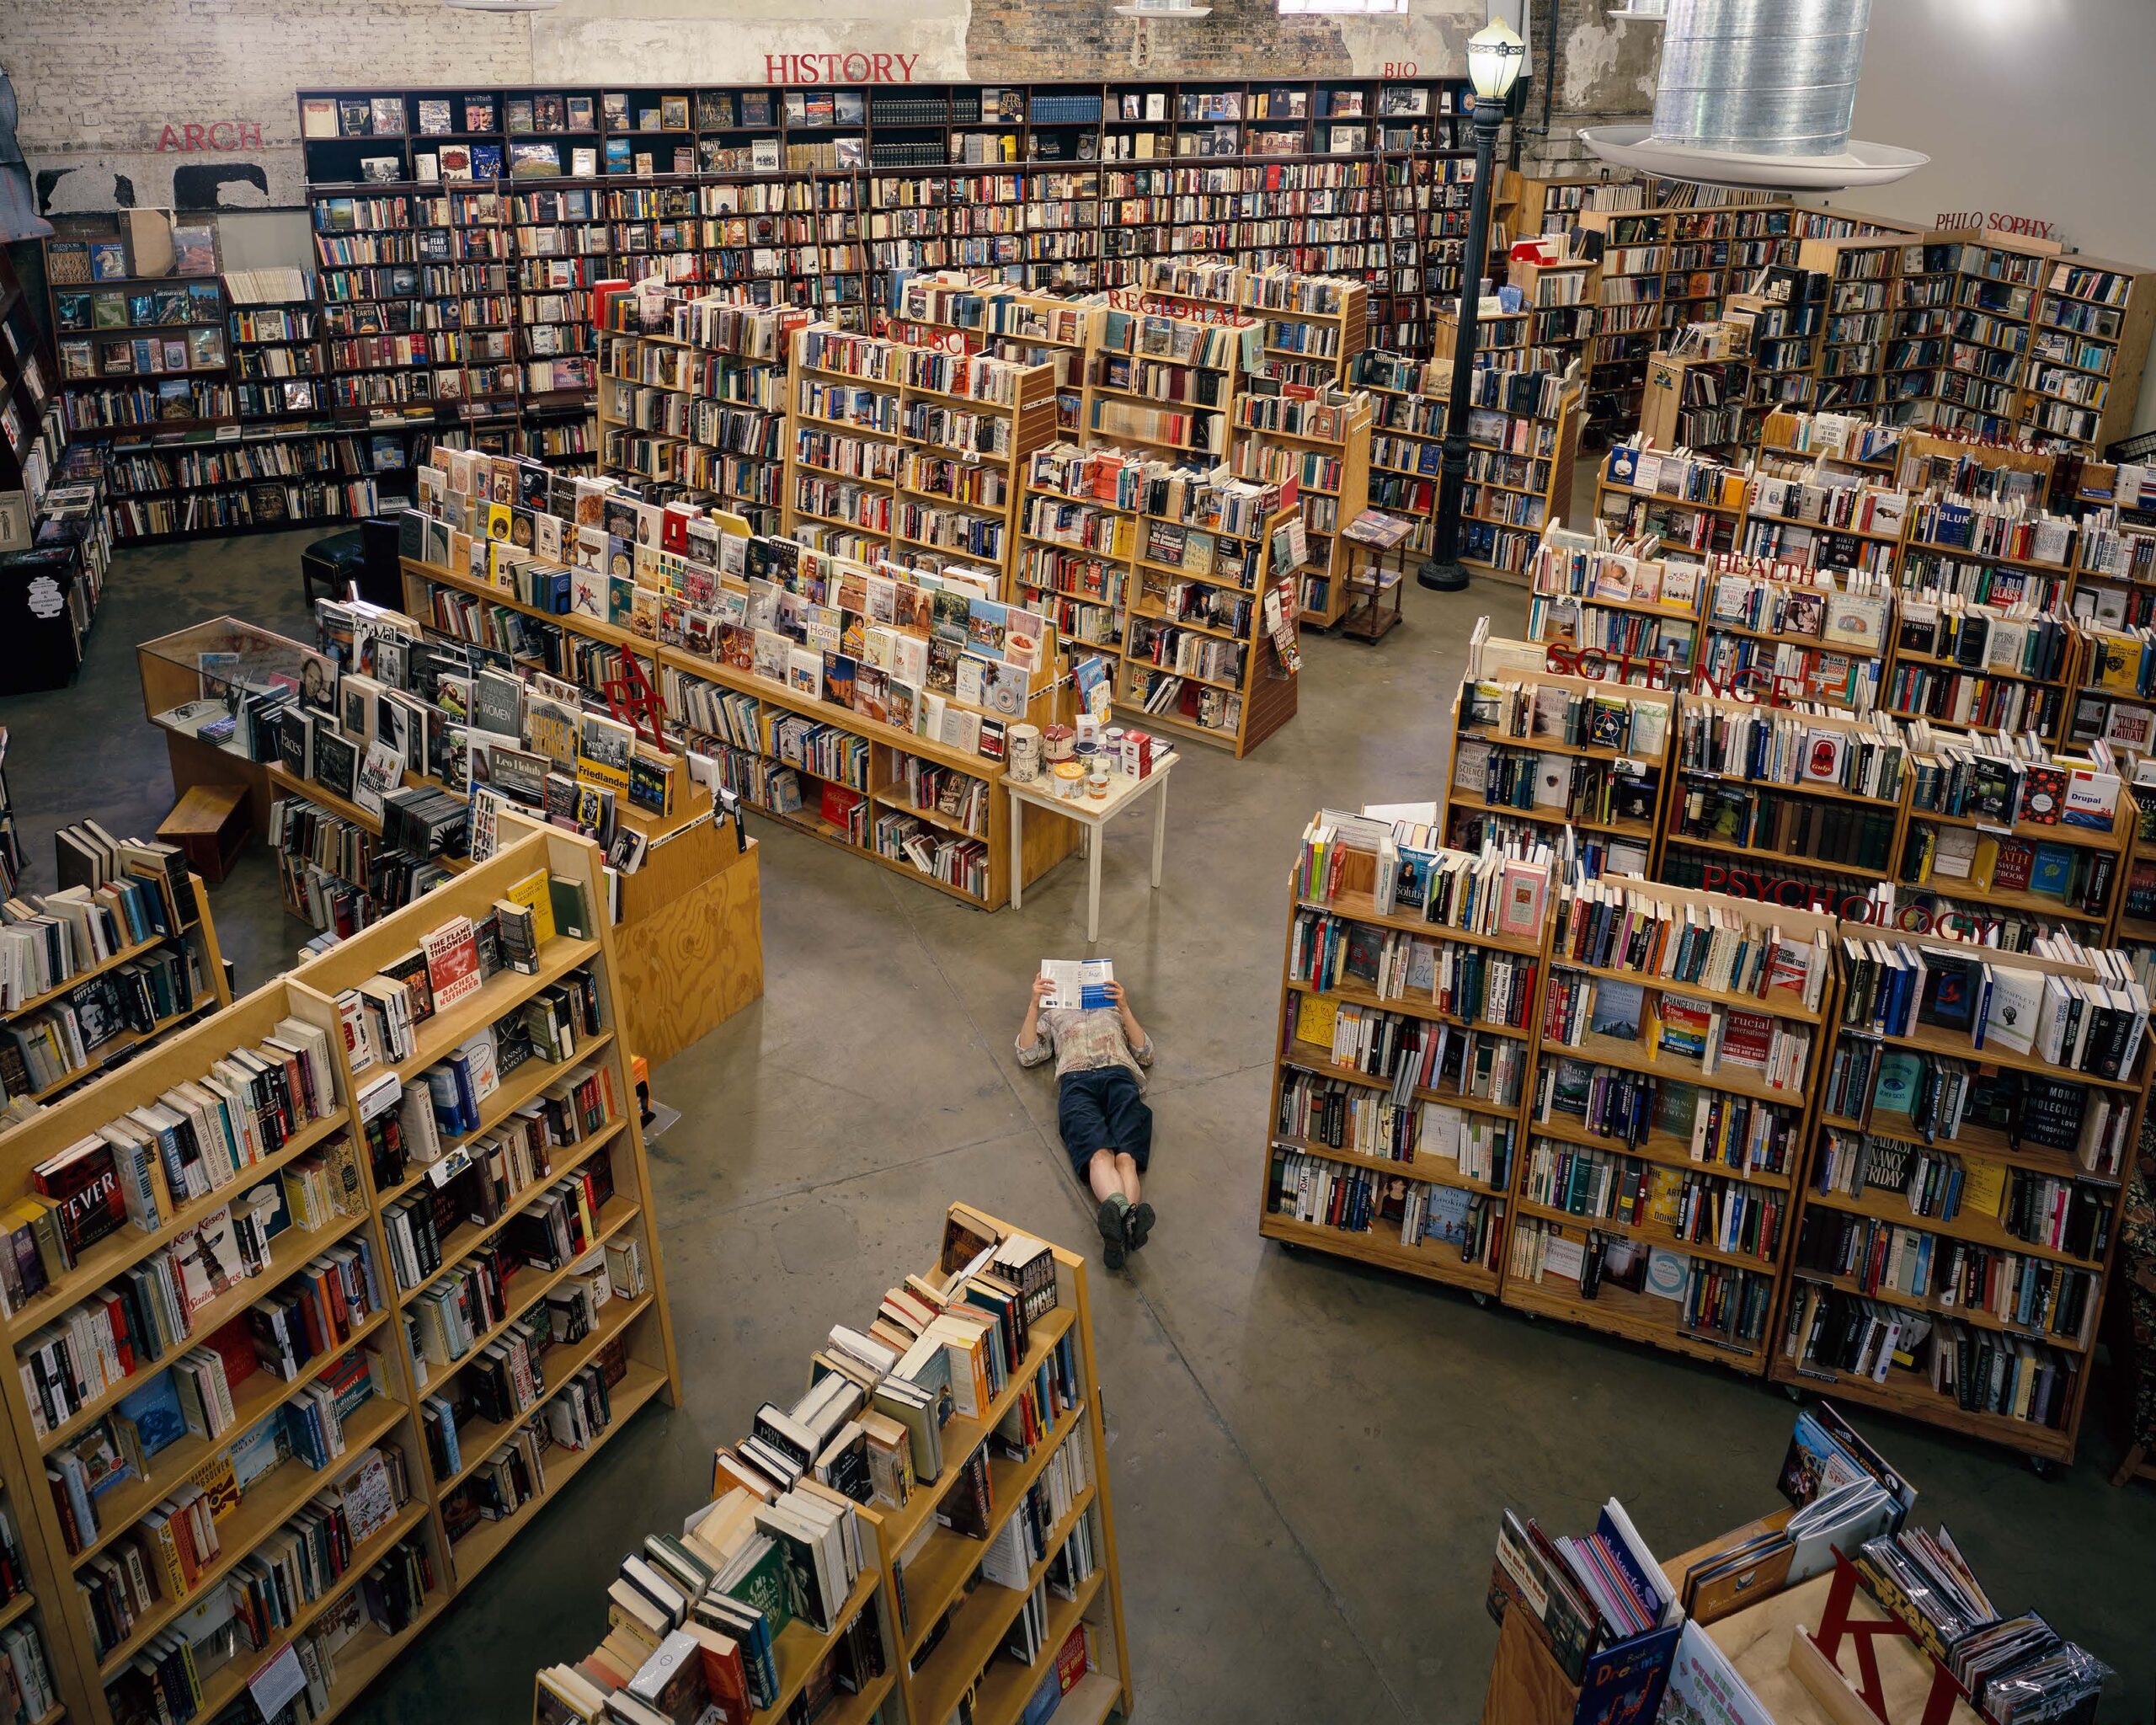 Bookstore filled with book shelves.